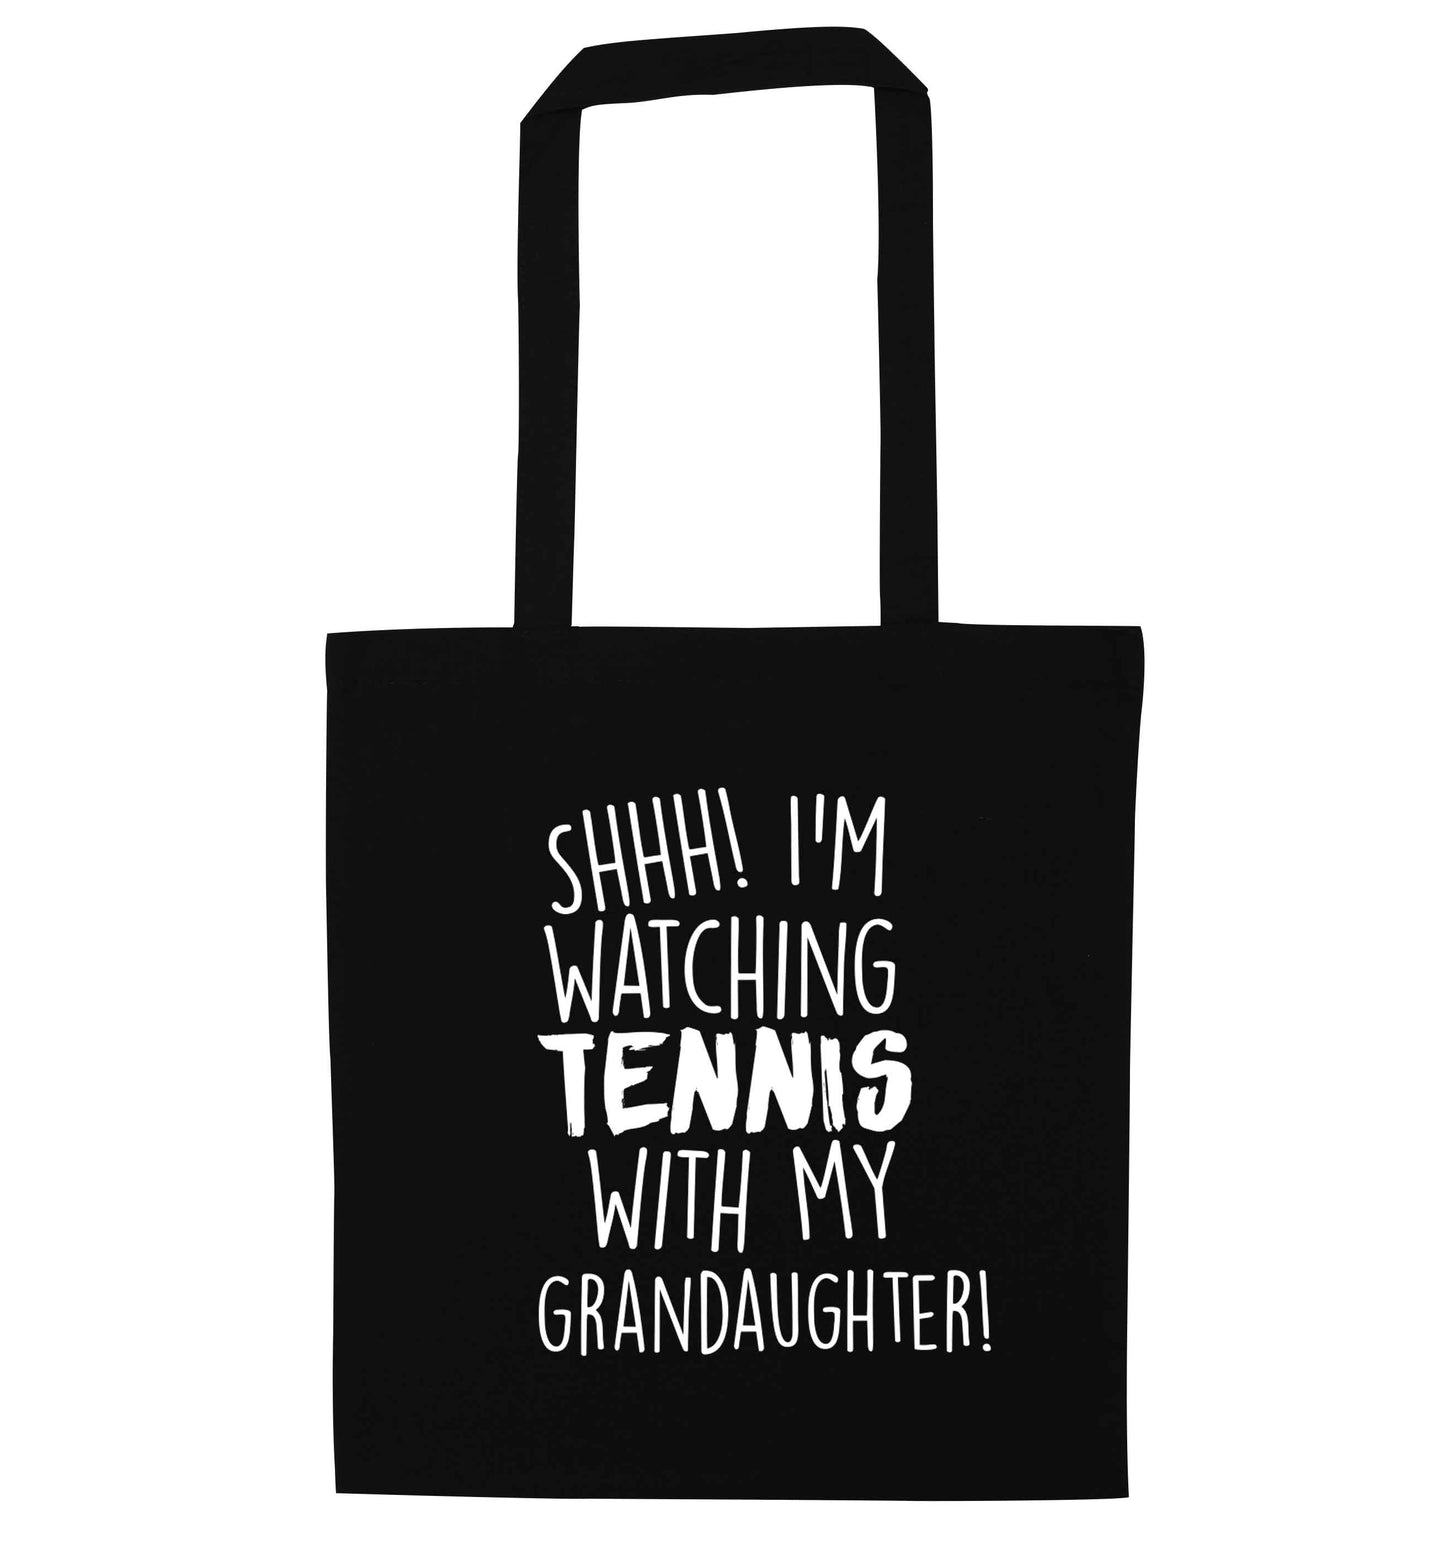 Shh! I'm watching tennis with my granddaughter! black tote bag